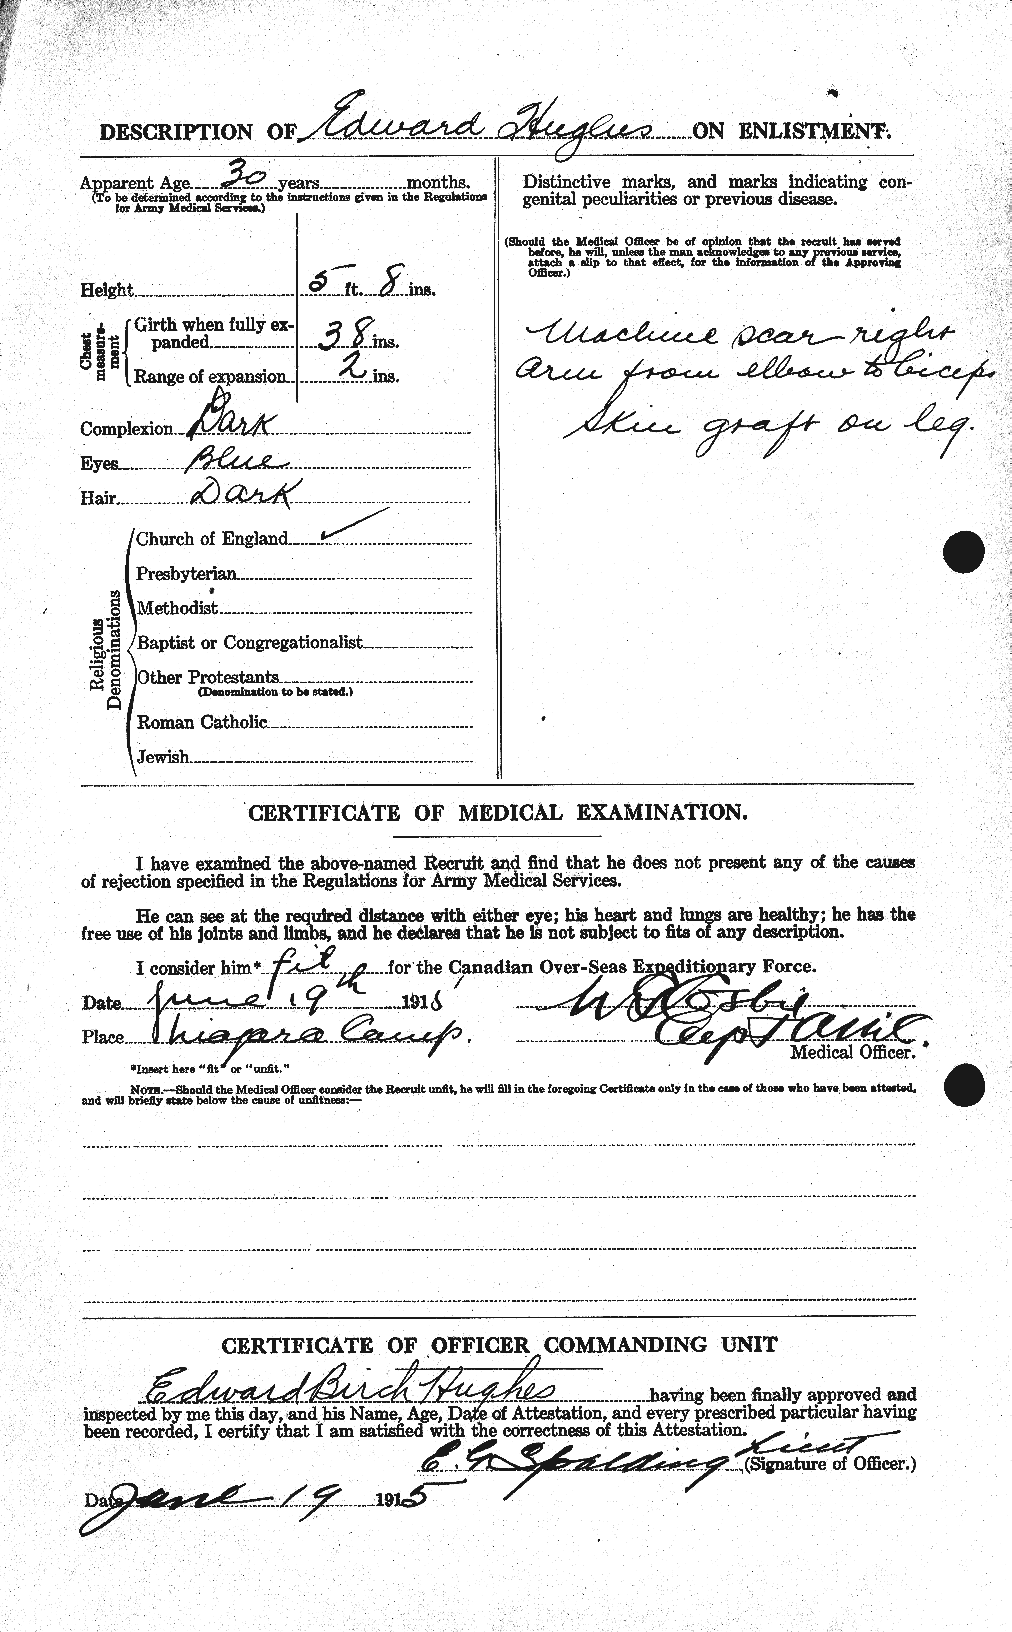 Personnel Records of the First World War - CEF 402680b